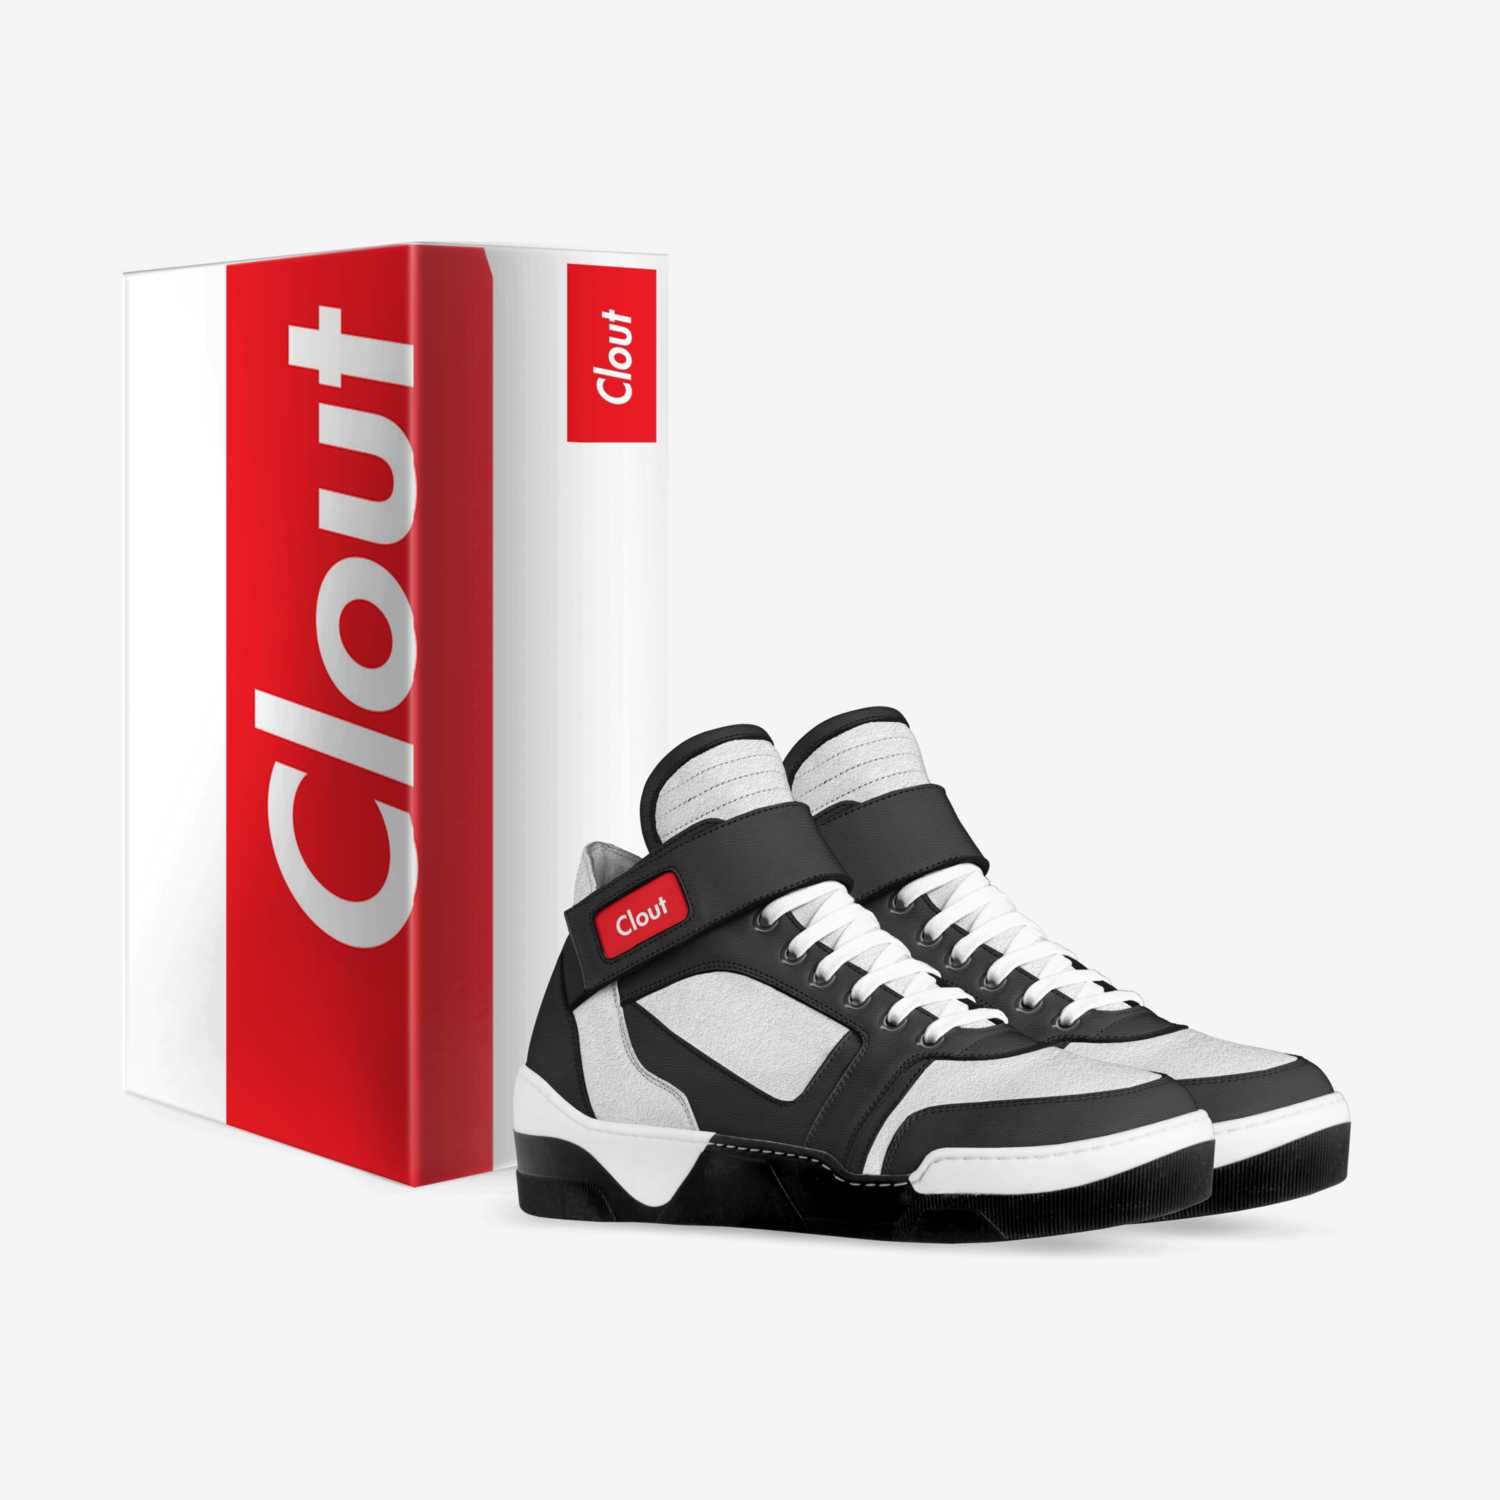 Clout 3's custom made in Italy shoes by Clout Gang | Box view